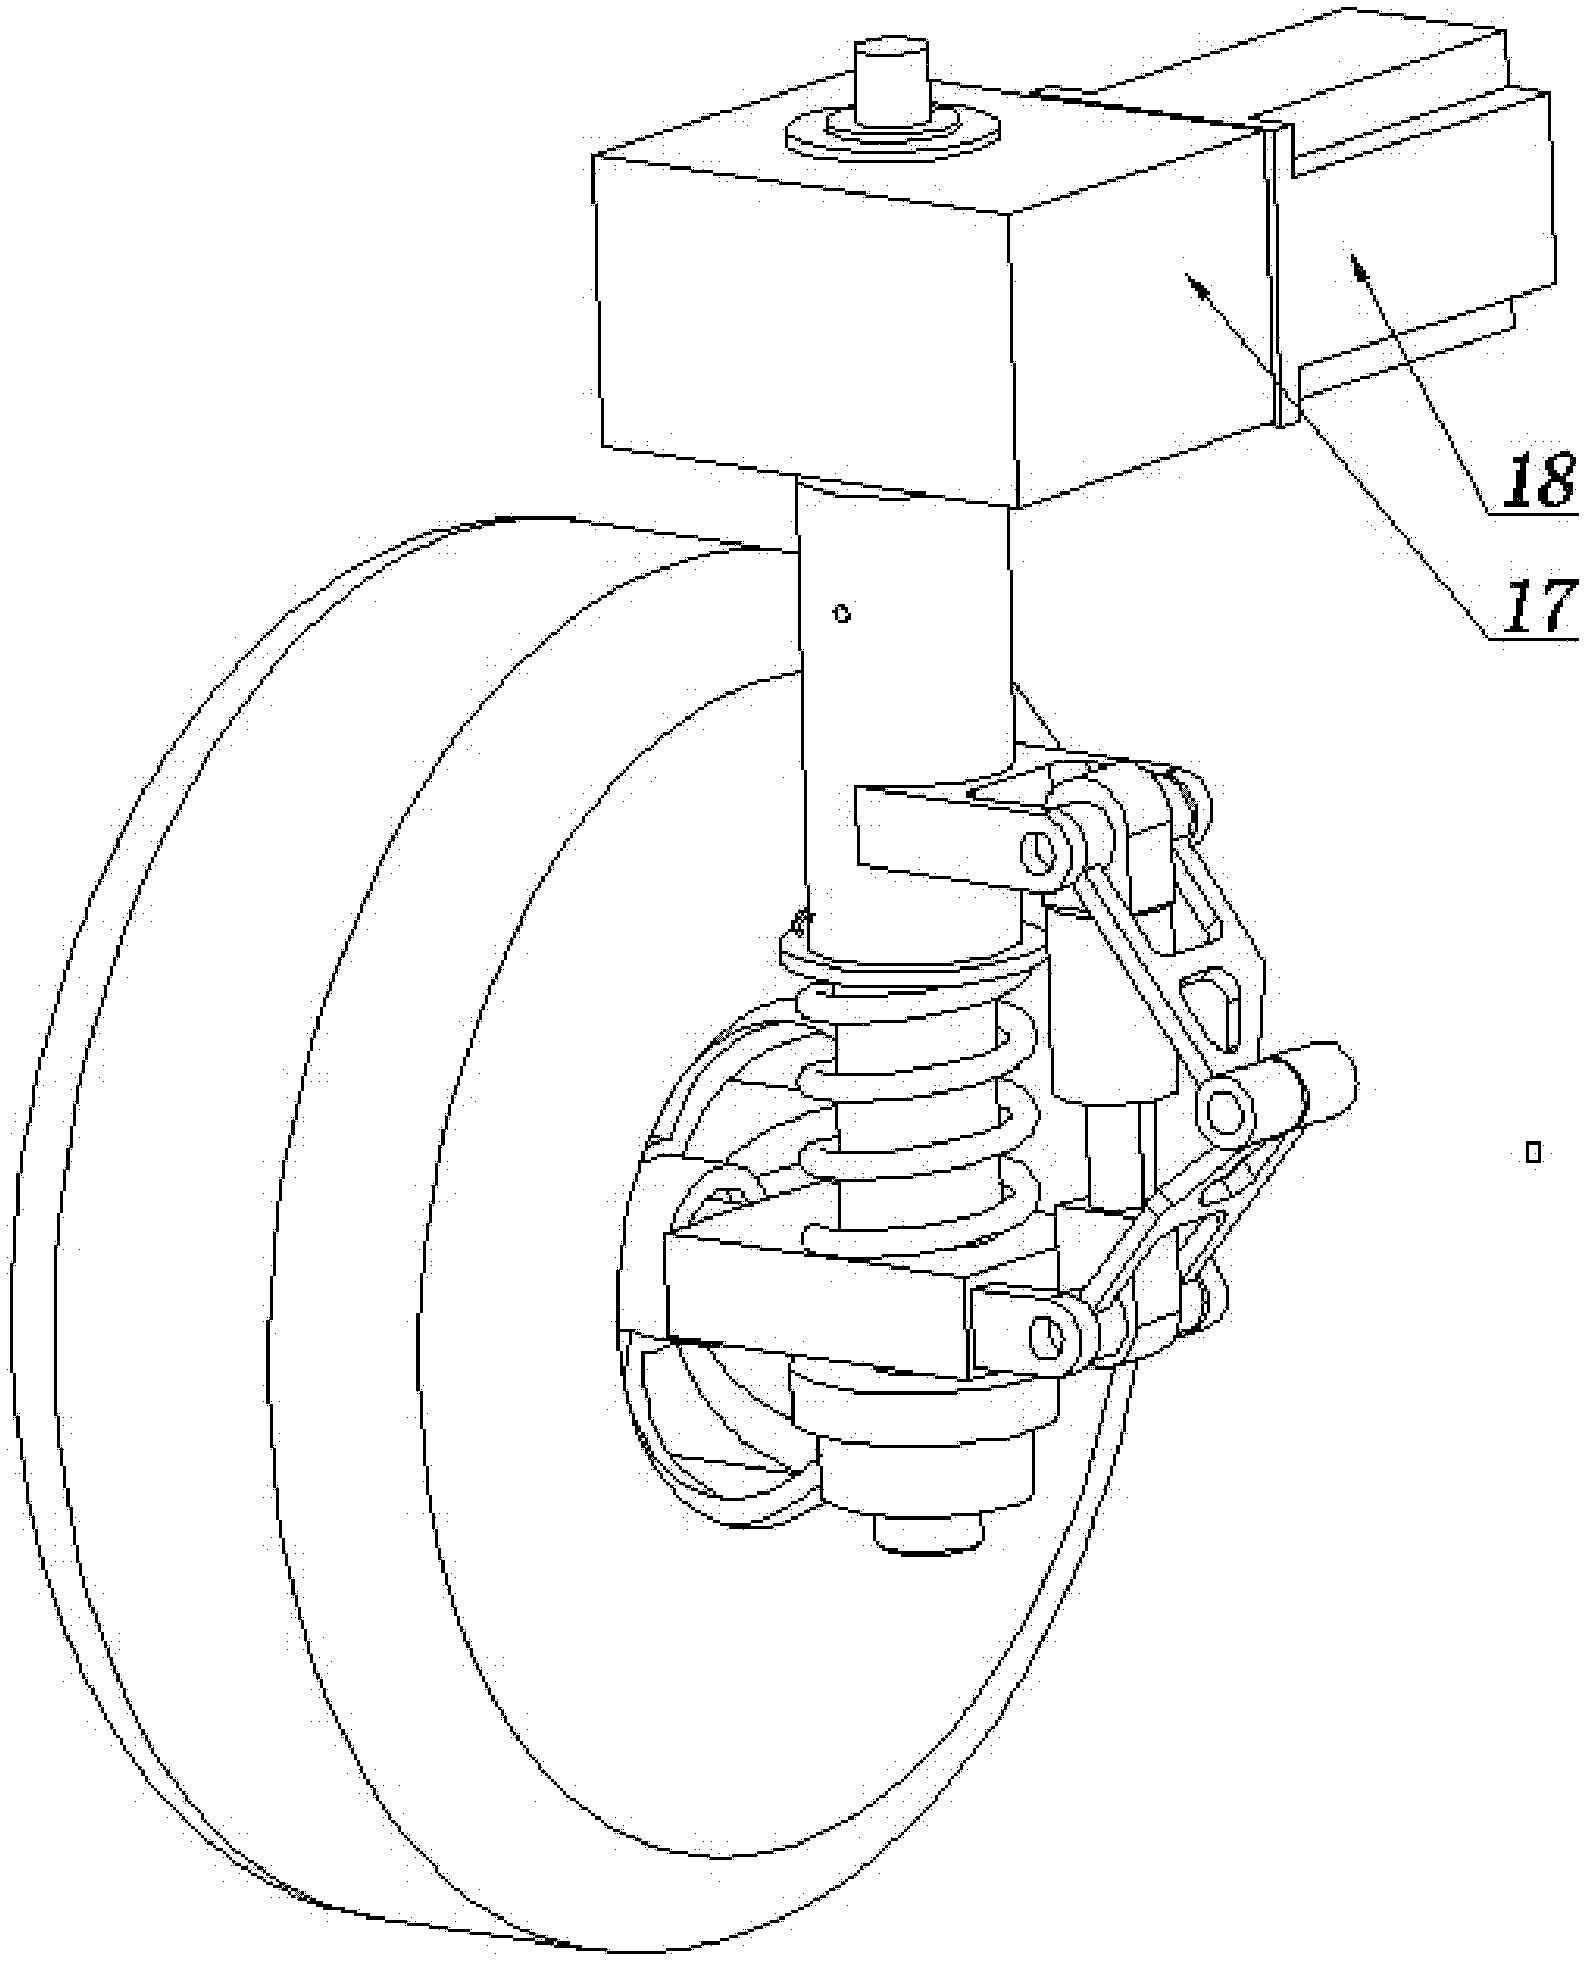 Steering/suspension integrated system